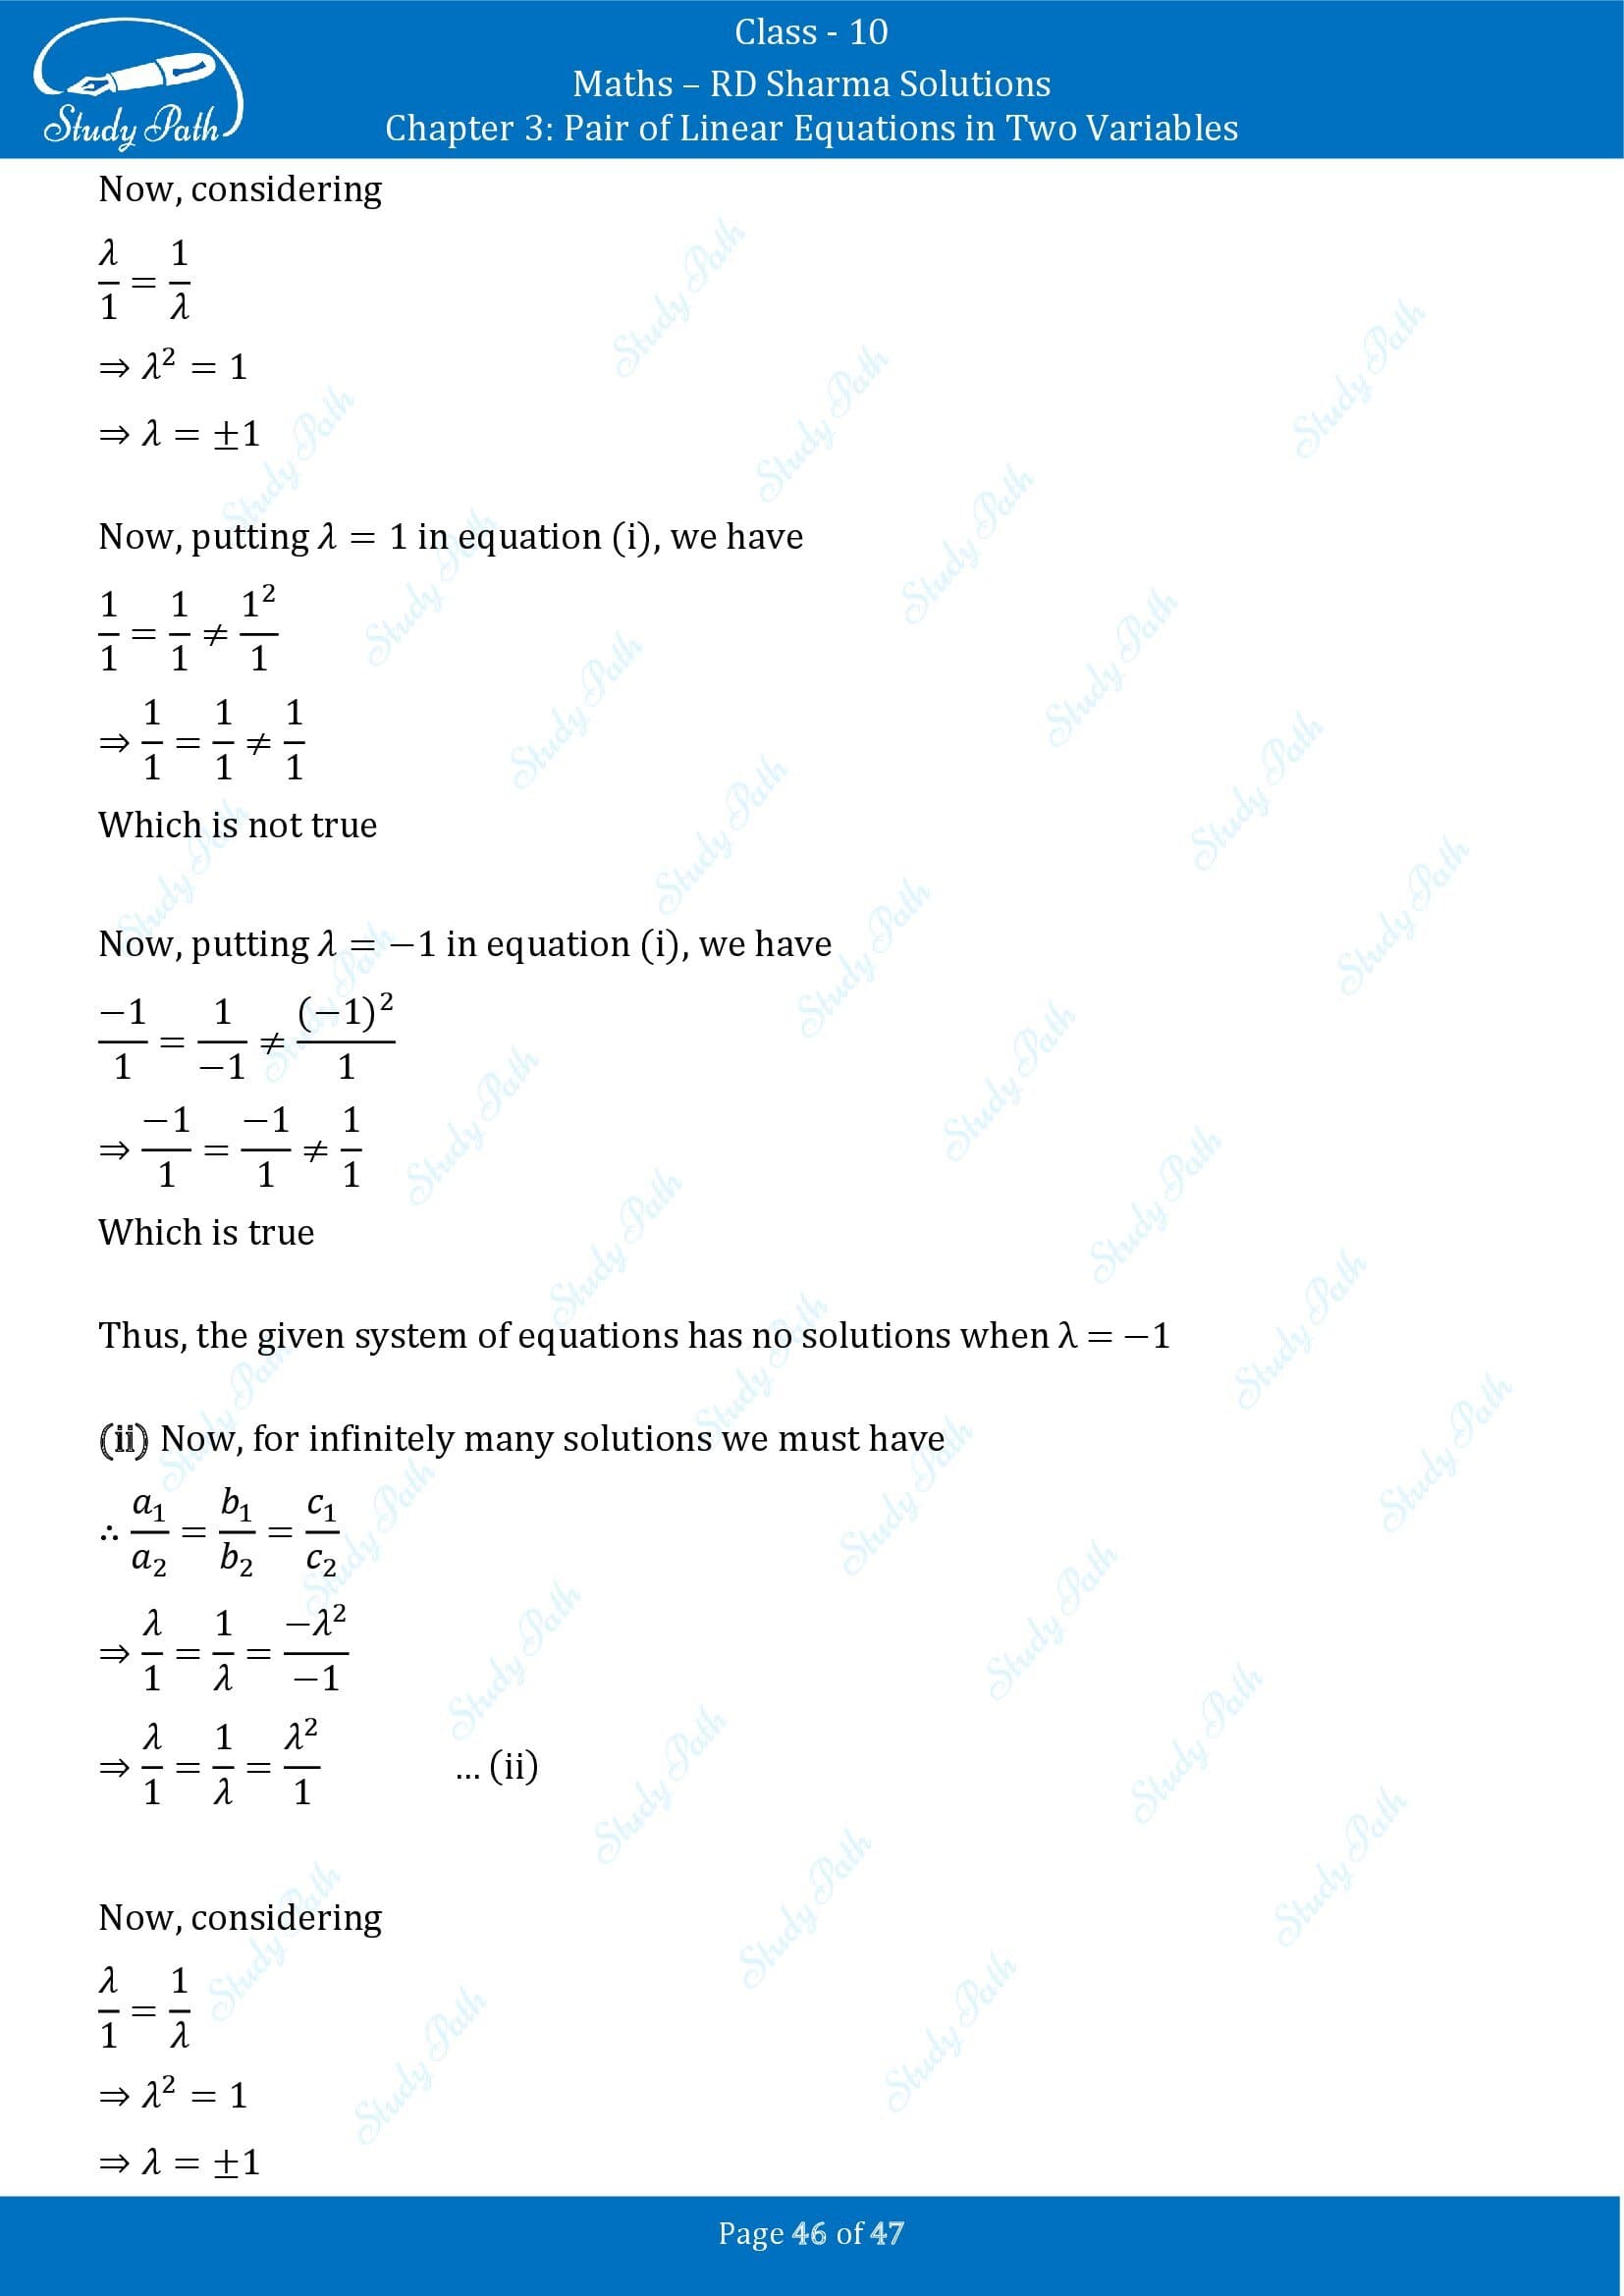 RD Sharma Solutions Class 10 Chapter 3 Pair of Linear Equations in Two Variables Exercise 3.5 00046